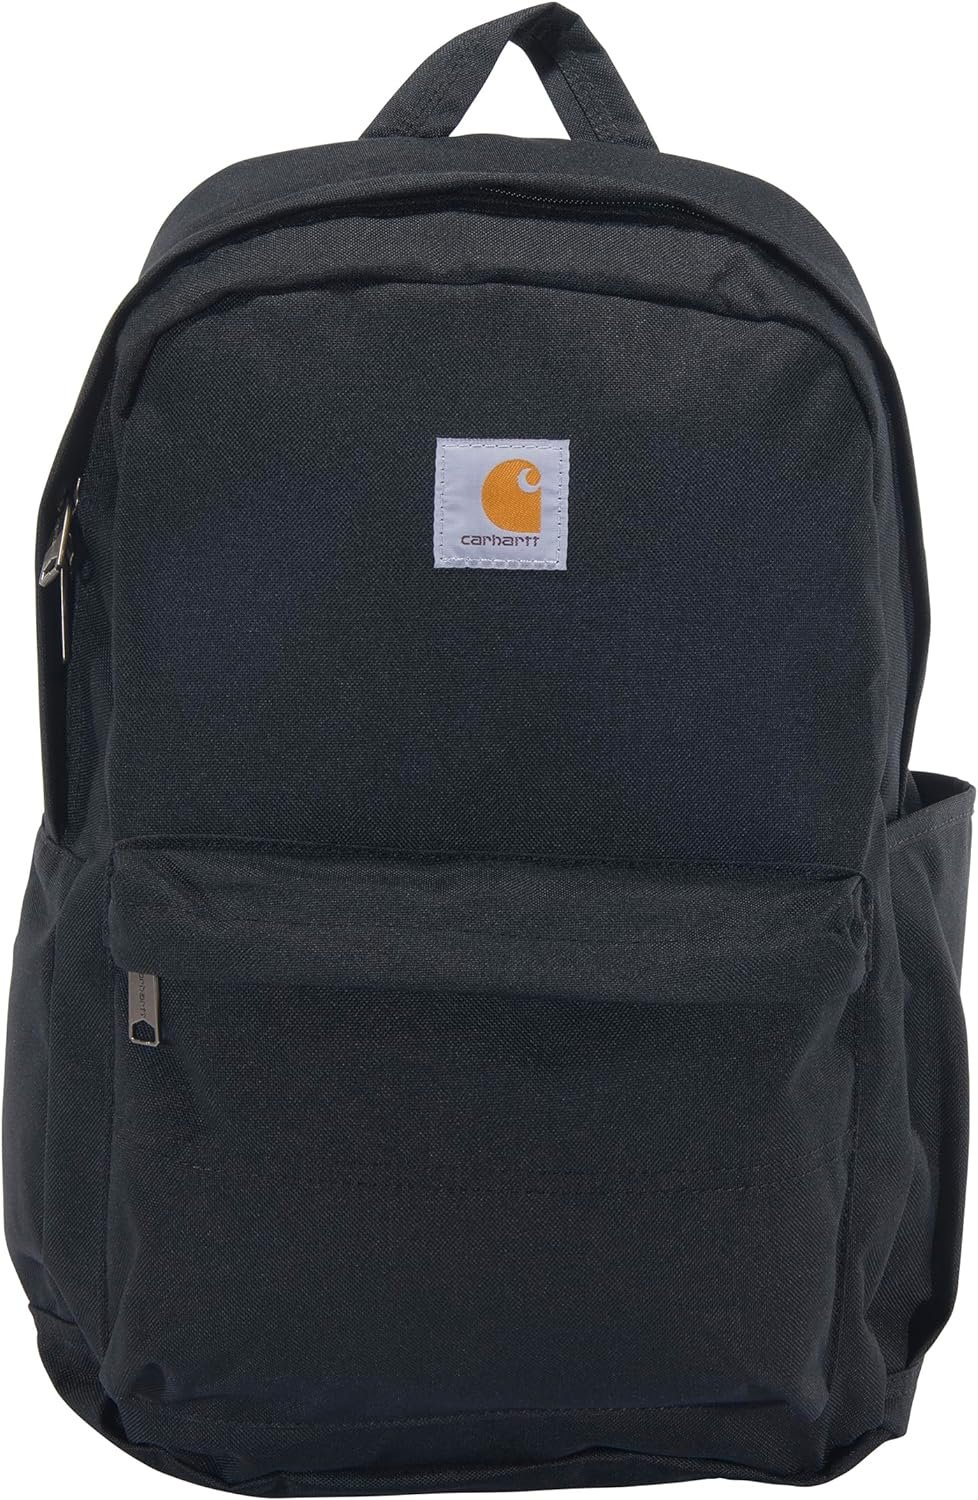 Carhartt 21L Backpack Review